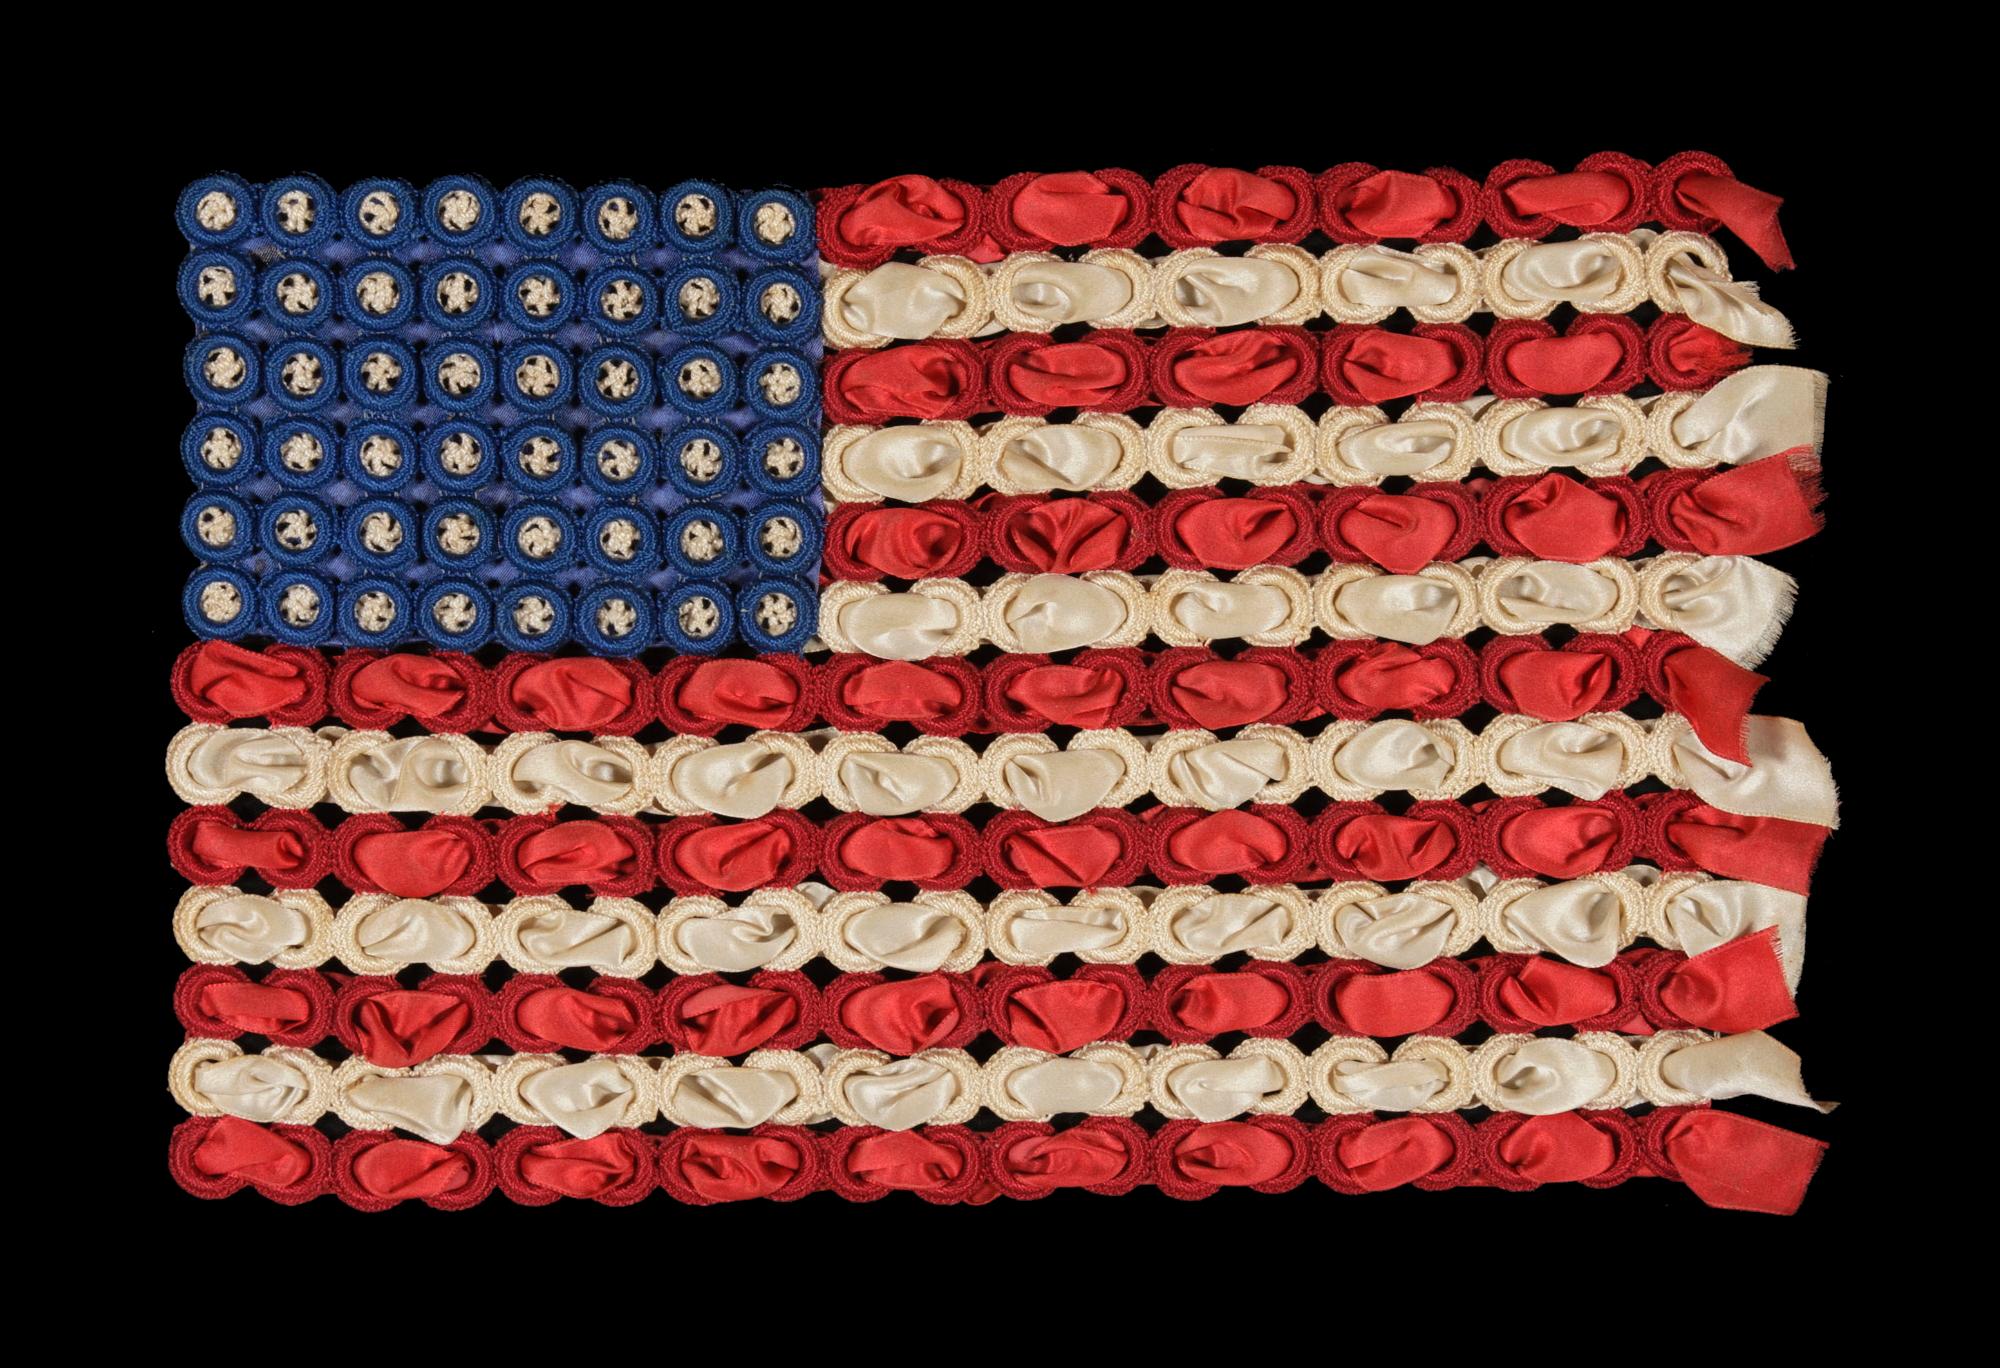 48 crocheted stars on a very graphic, three-dimensional flag made from silk ribbon and crocheted rings, WWI Era (U.S. involvement 1917-18)

Homemade, hand-constructed flags made from crocheted needlework, tatting, and/or various fabric and paper